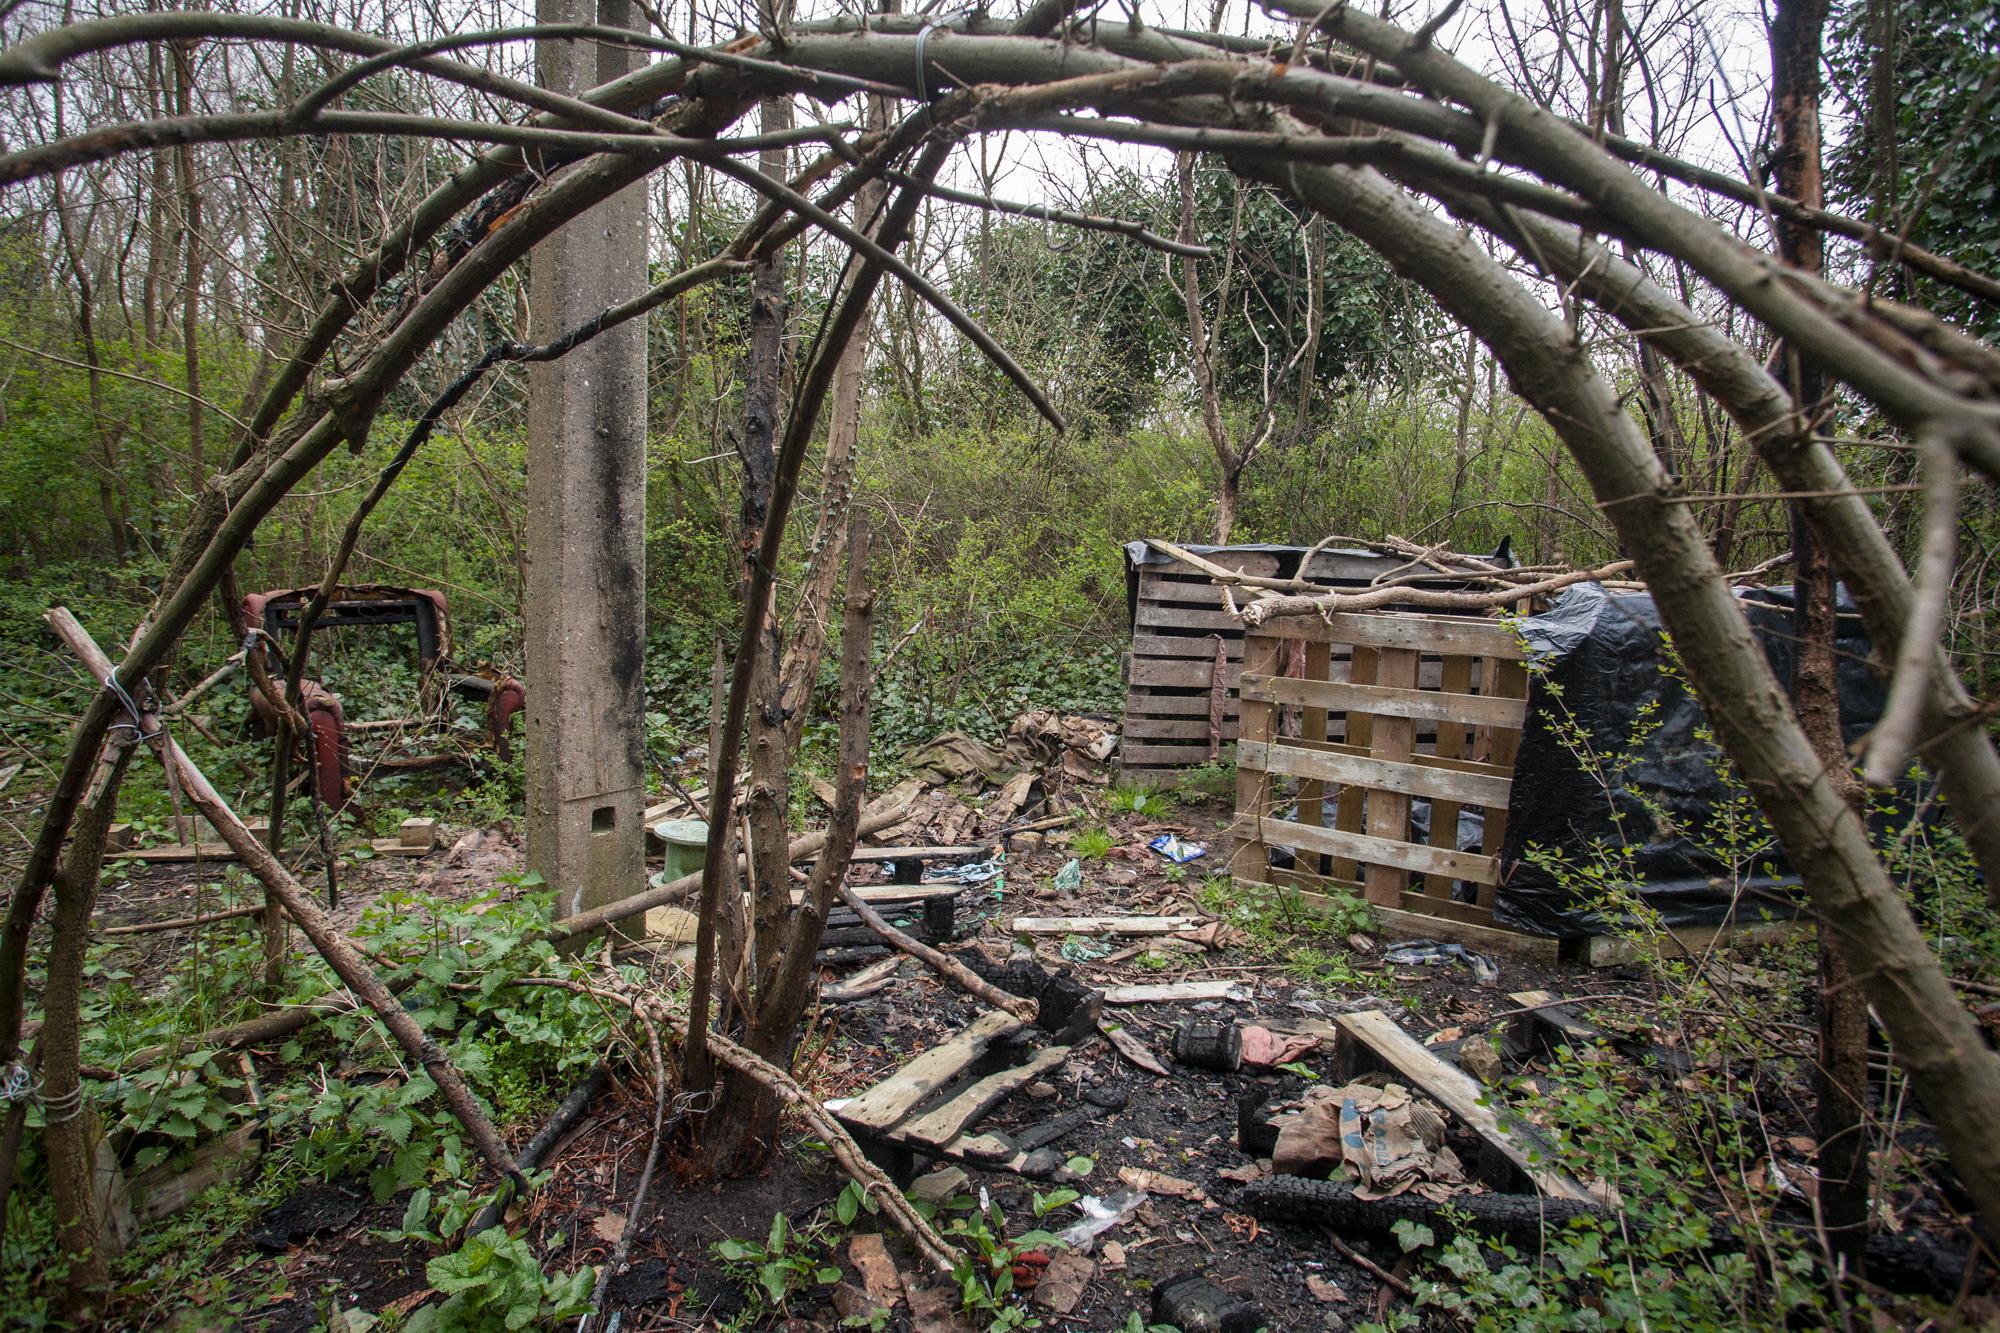 Migrants in Calais, France (2008) - Shelter burned by the police in the Garennes woods....